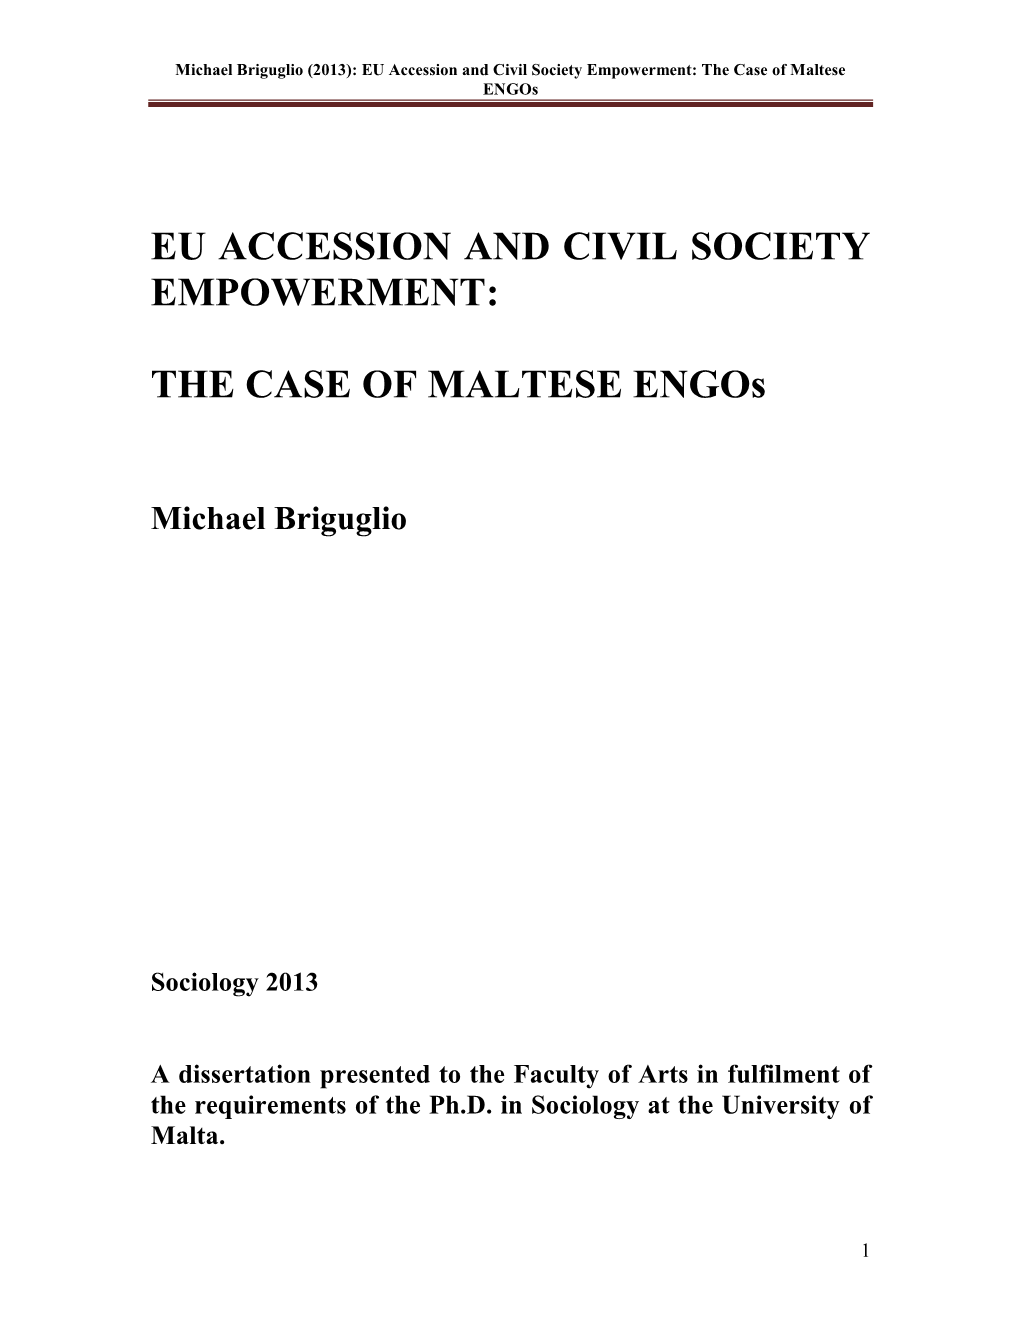 (2013): EU Accession and Civil Society Empowerment: the Case of Maltese Engos